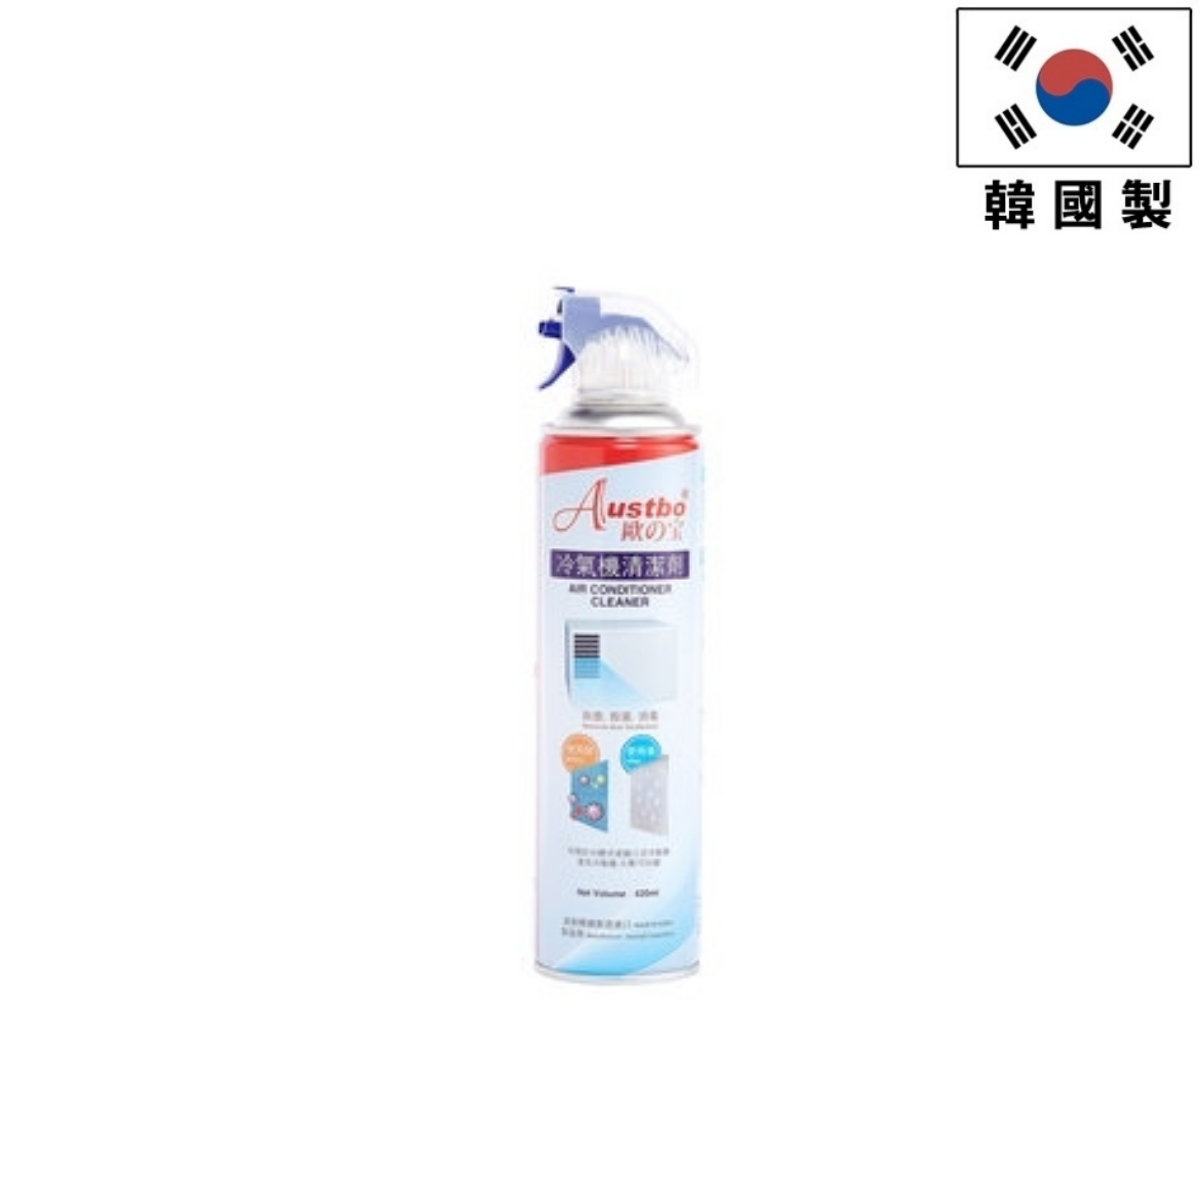 Austbo Air Conditioner Cleaner - 420ml